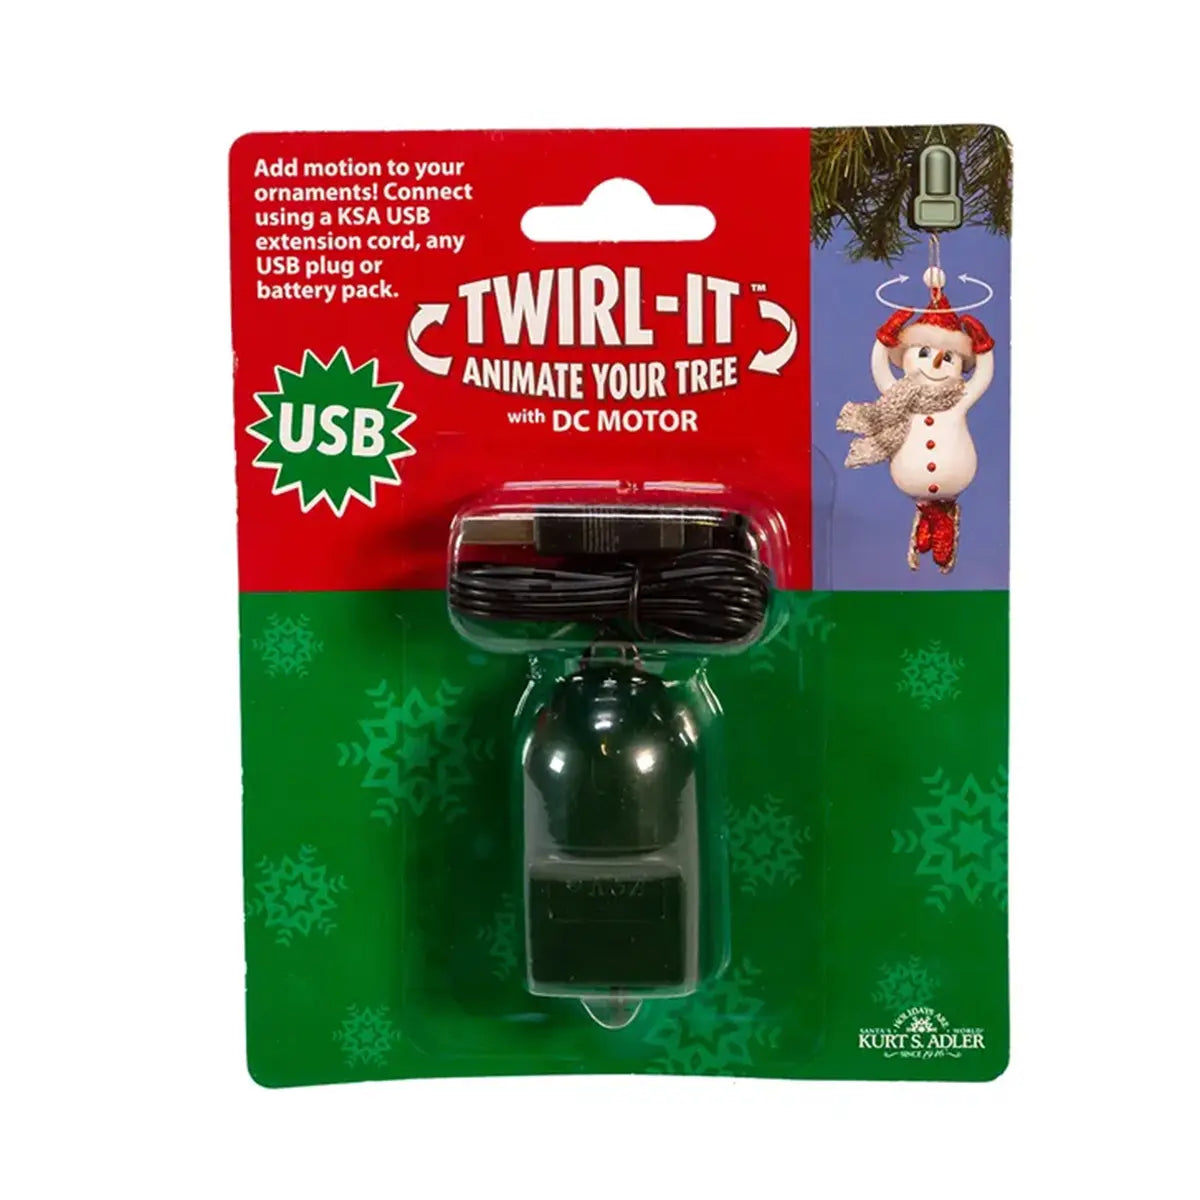 Kurt Adler USB Twirl-It With Dc Motor And 24 in Length Between USB and Rotary